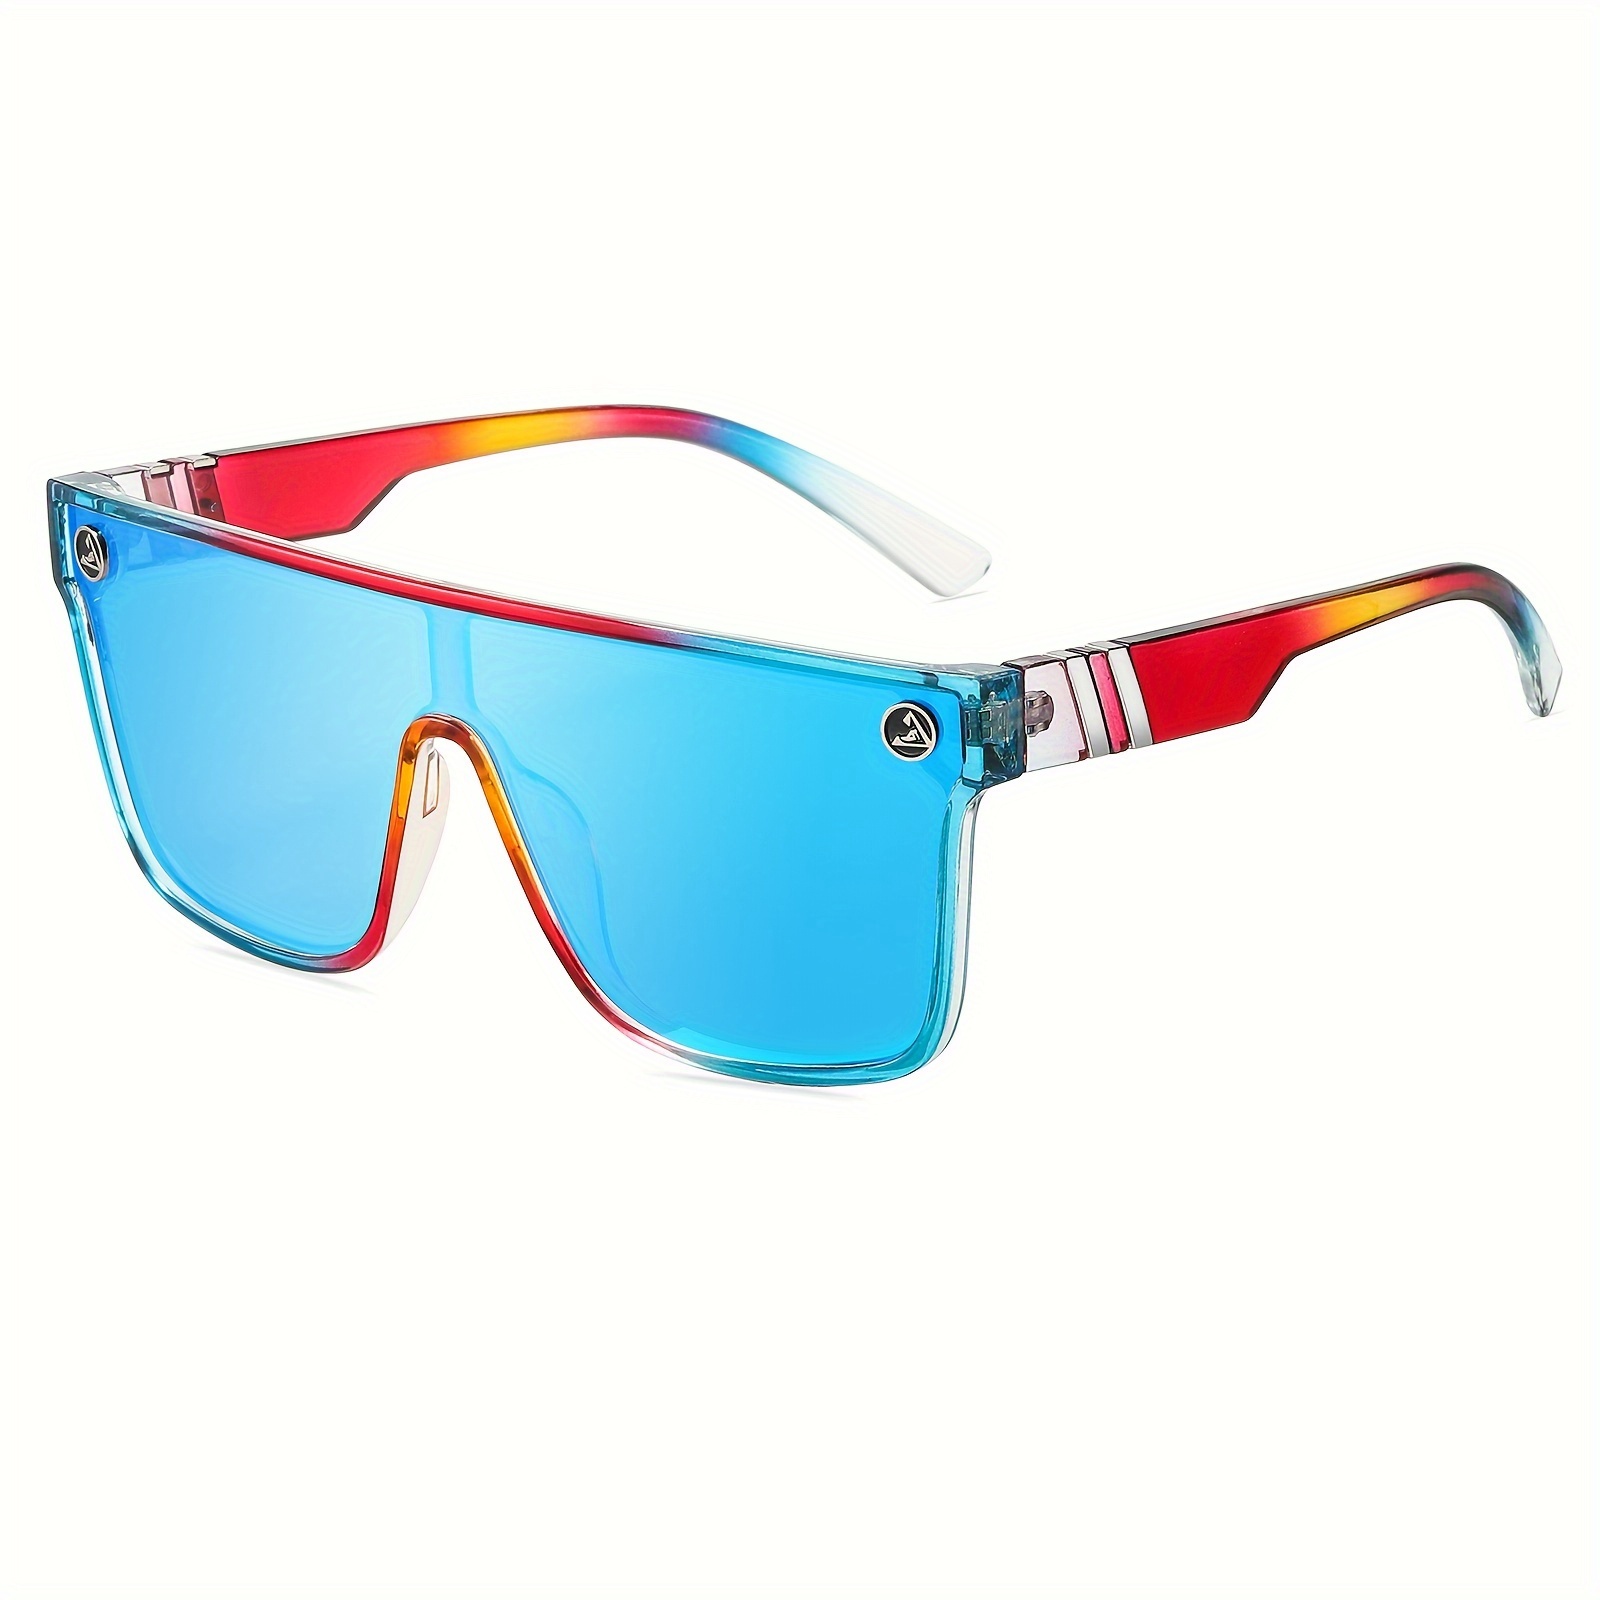 

Fashion Glasses For Men And Women, Mtb Bike Bicycle Glasses Outdoor Sports Cycling Eyewear